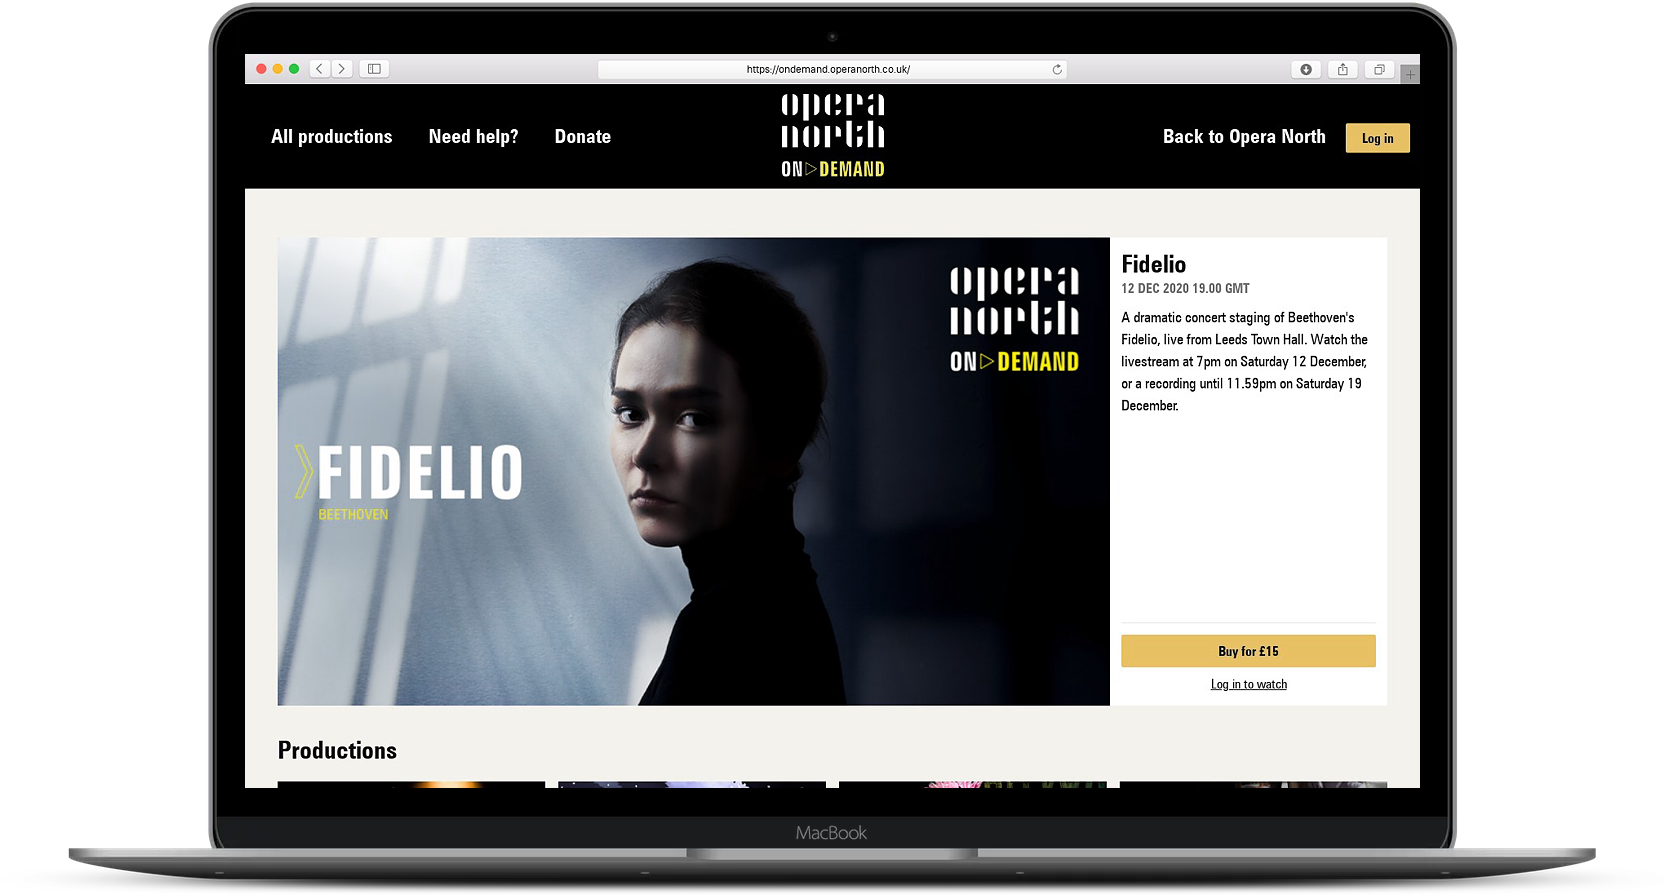 Opera North's website, inviting people to pay for and view Fidelio online